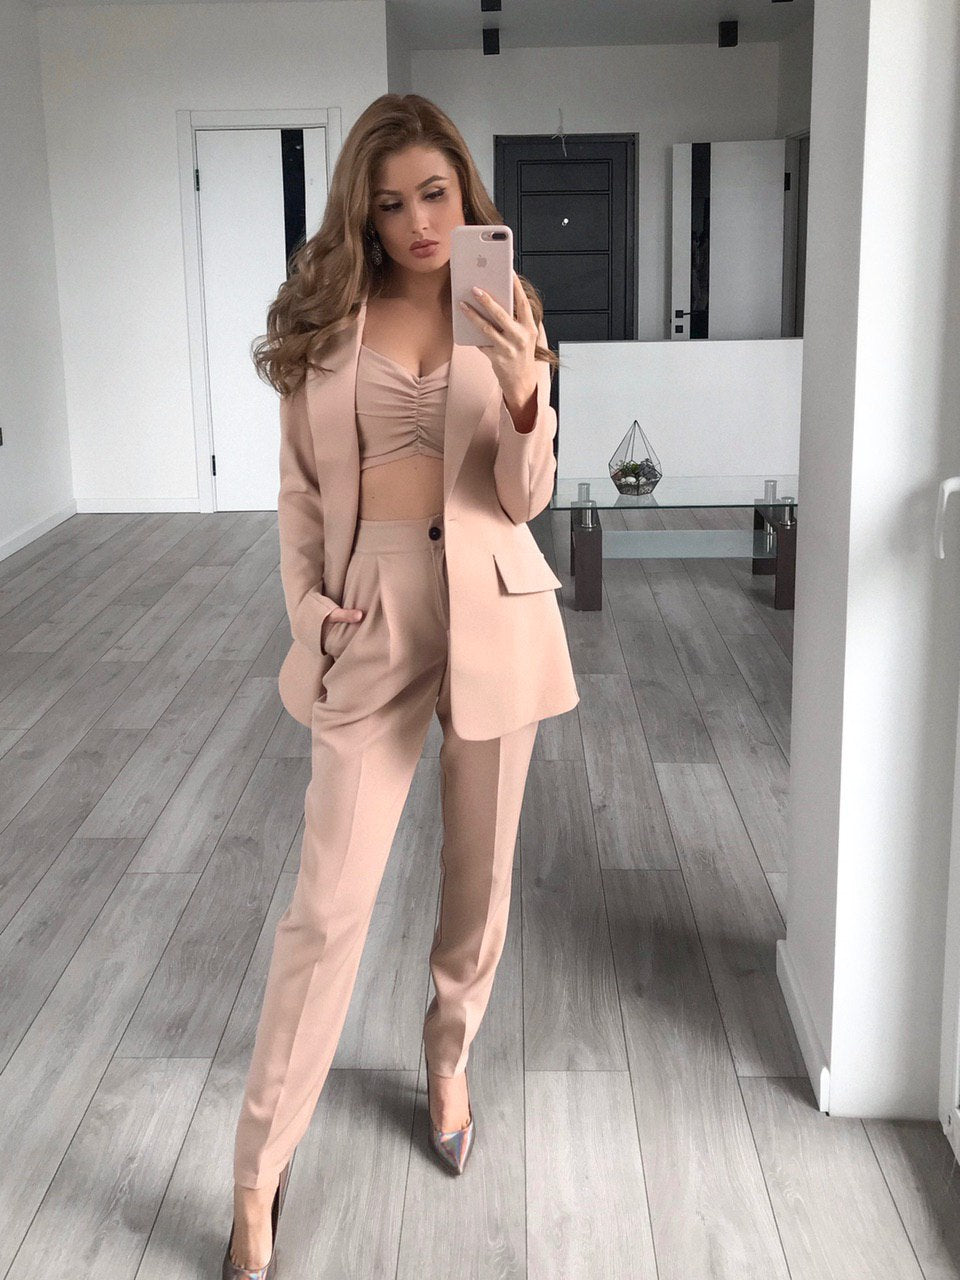 trinarosh Beige Casual 3-Piece Suit With Straight Leg Trousers And Top